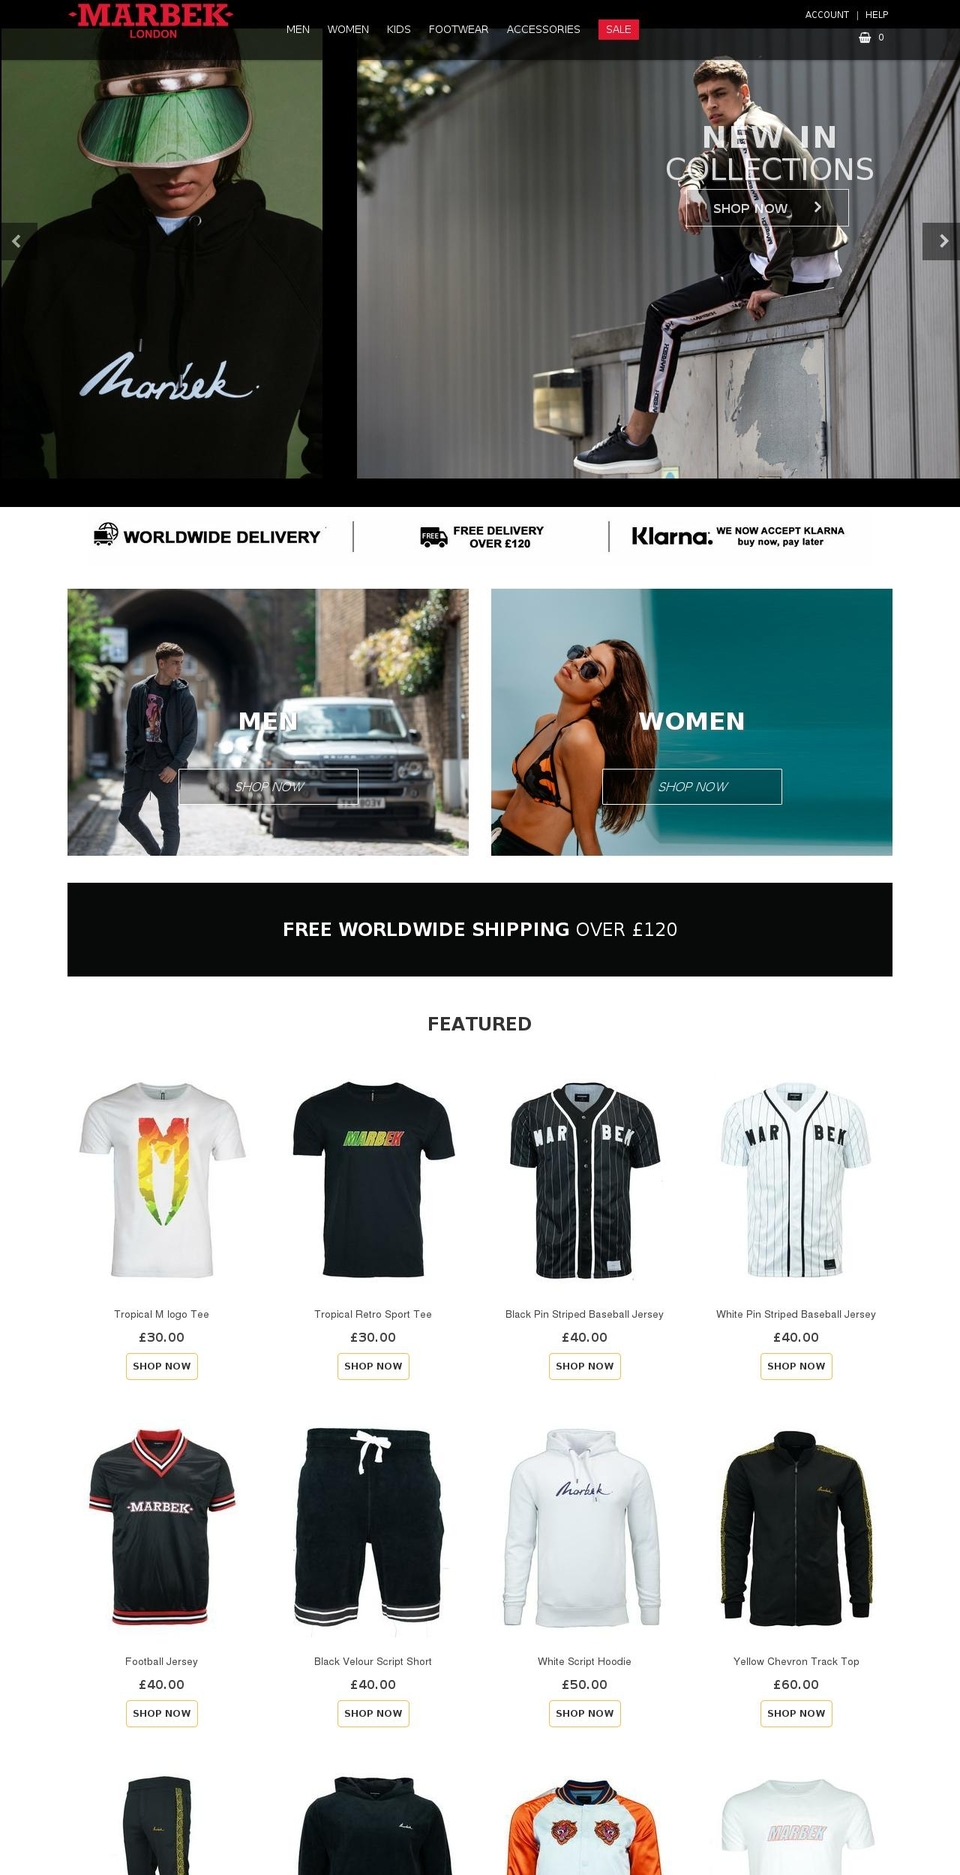 everything-bakery-r43 Shopify theme site example marbekclothing.com